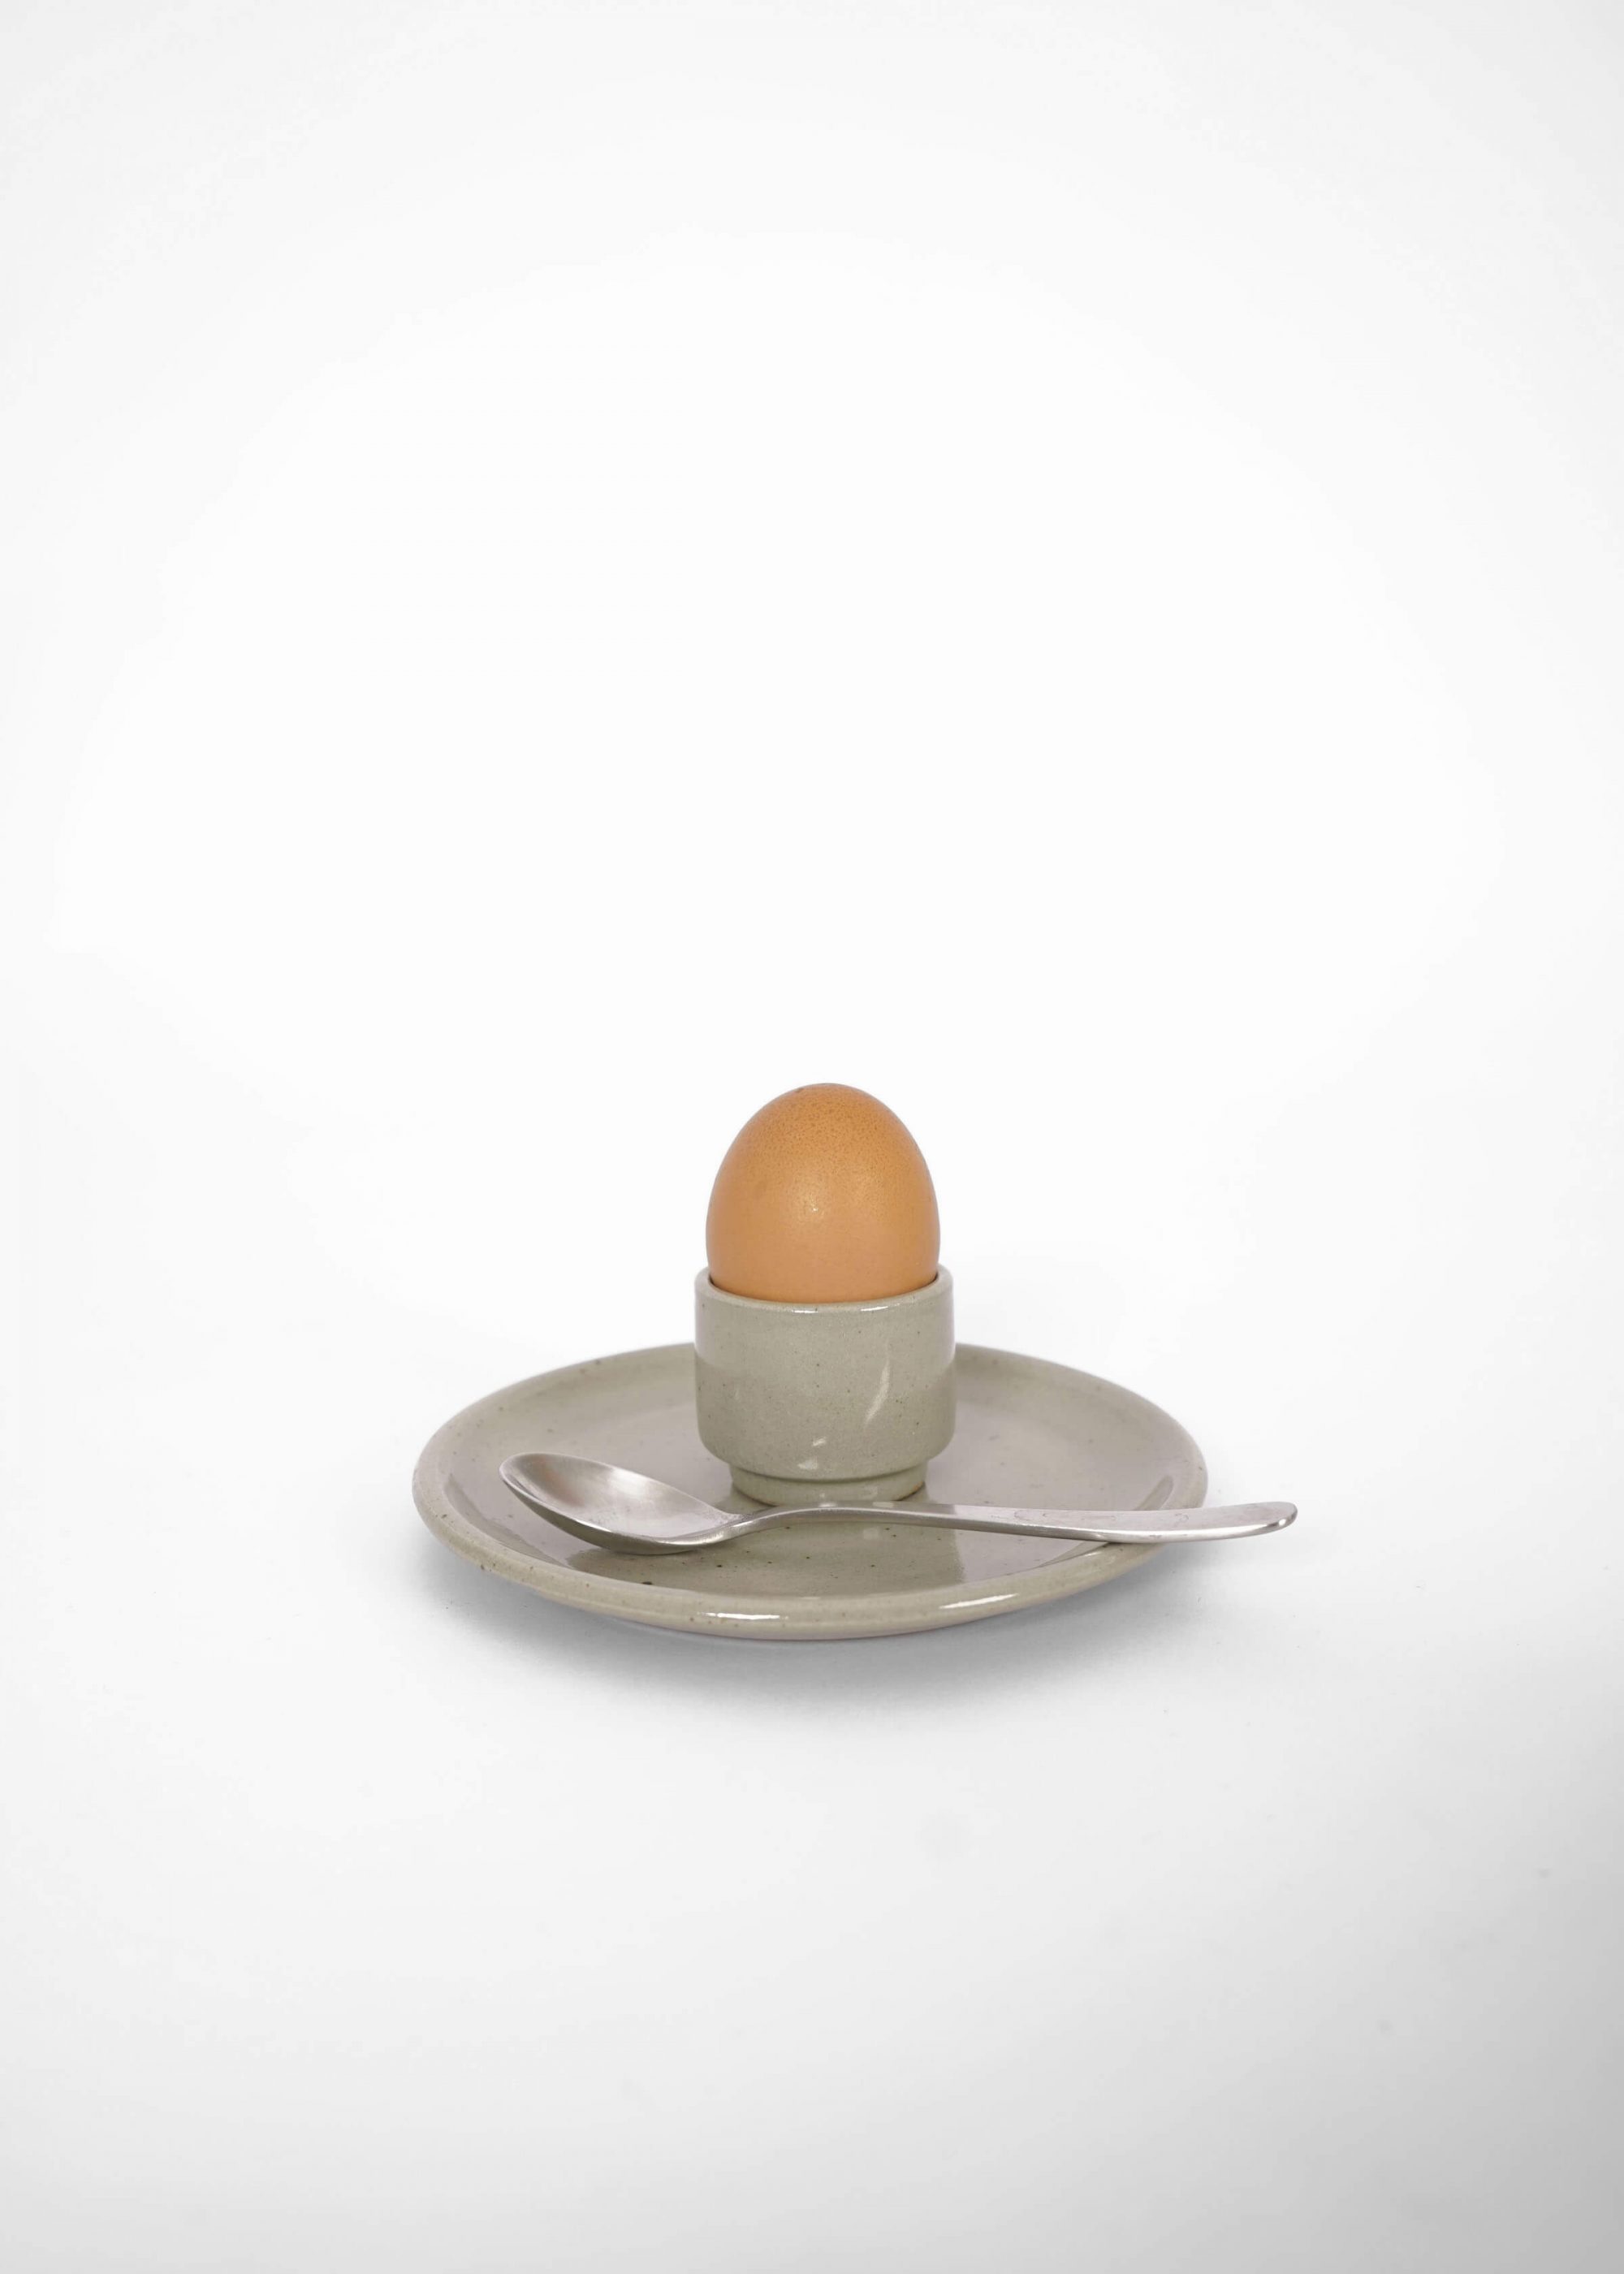 Product image for N° ICSF1 BRUTAL Egg Cup